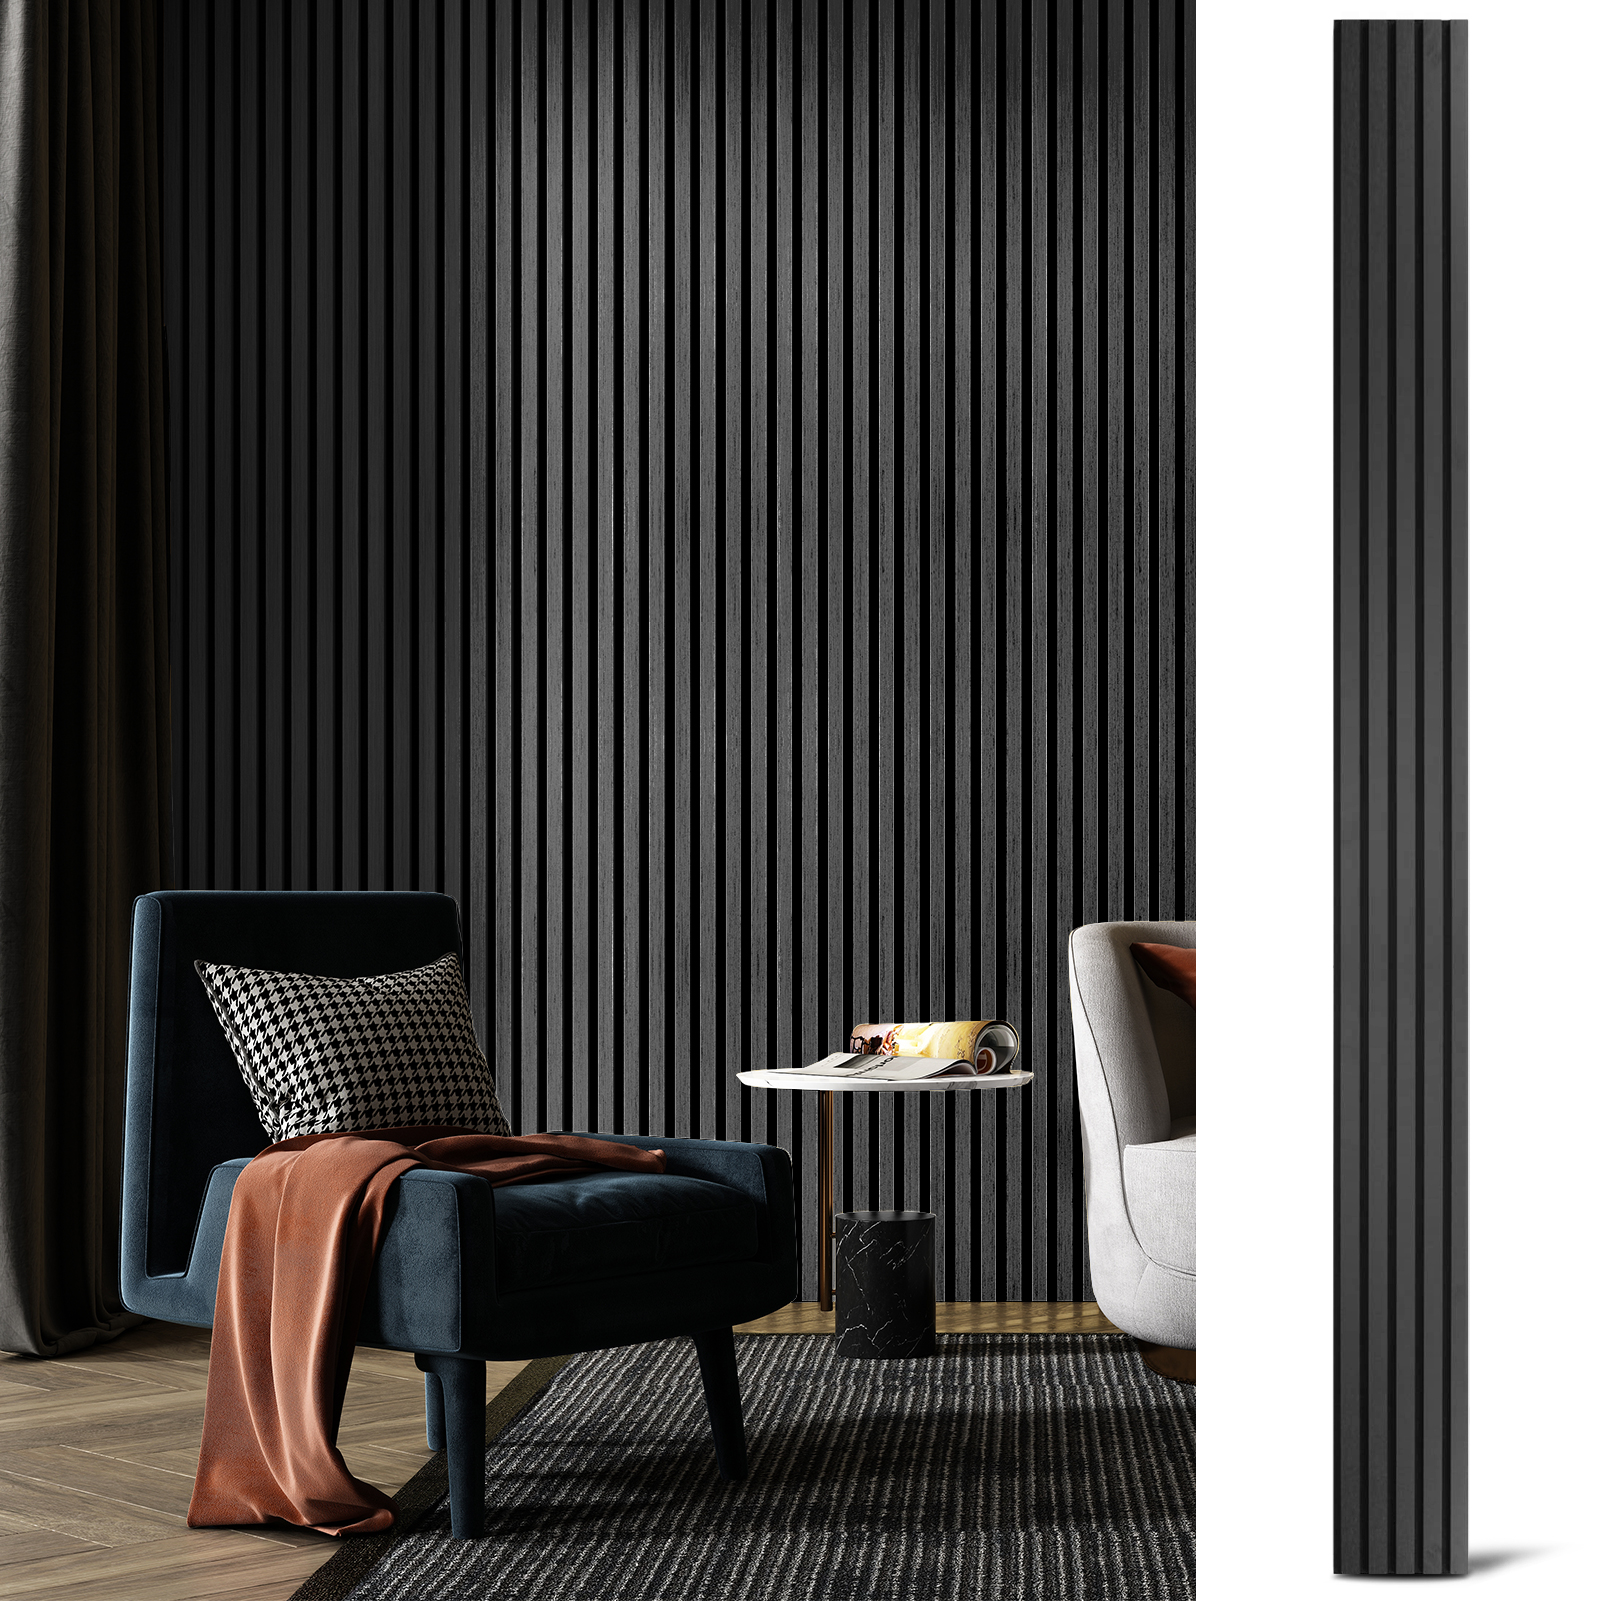 A31001-Art3d 4-Piece Wood Slat Acoustic Panels for Stylish Decor and Noise Reduction, 3D Textured Panel for Ceiling and Wall, Matte Black